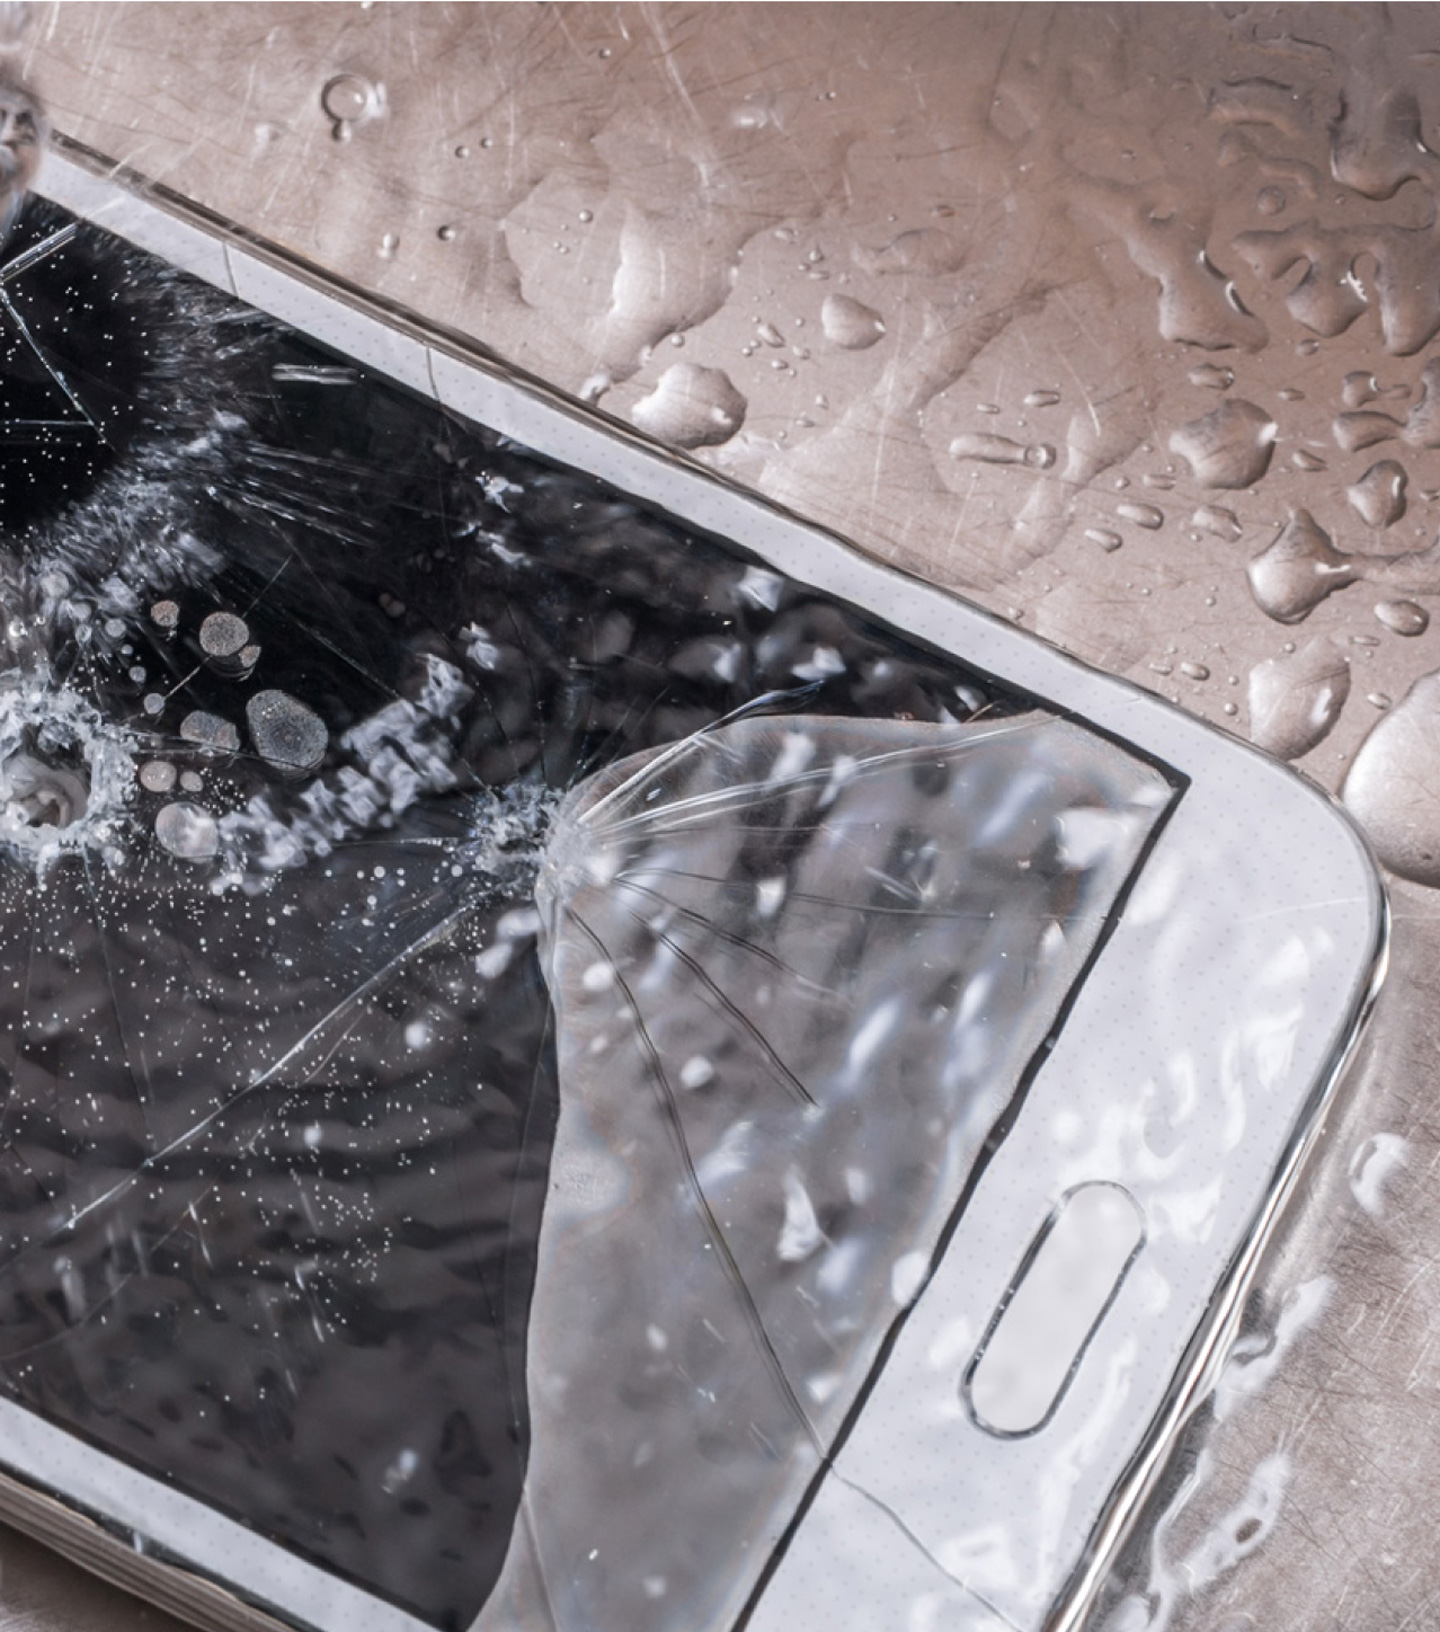 Smartphone with holes and cracked screen destroyed by water droplets